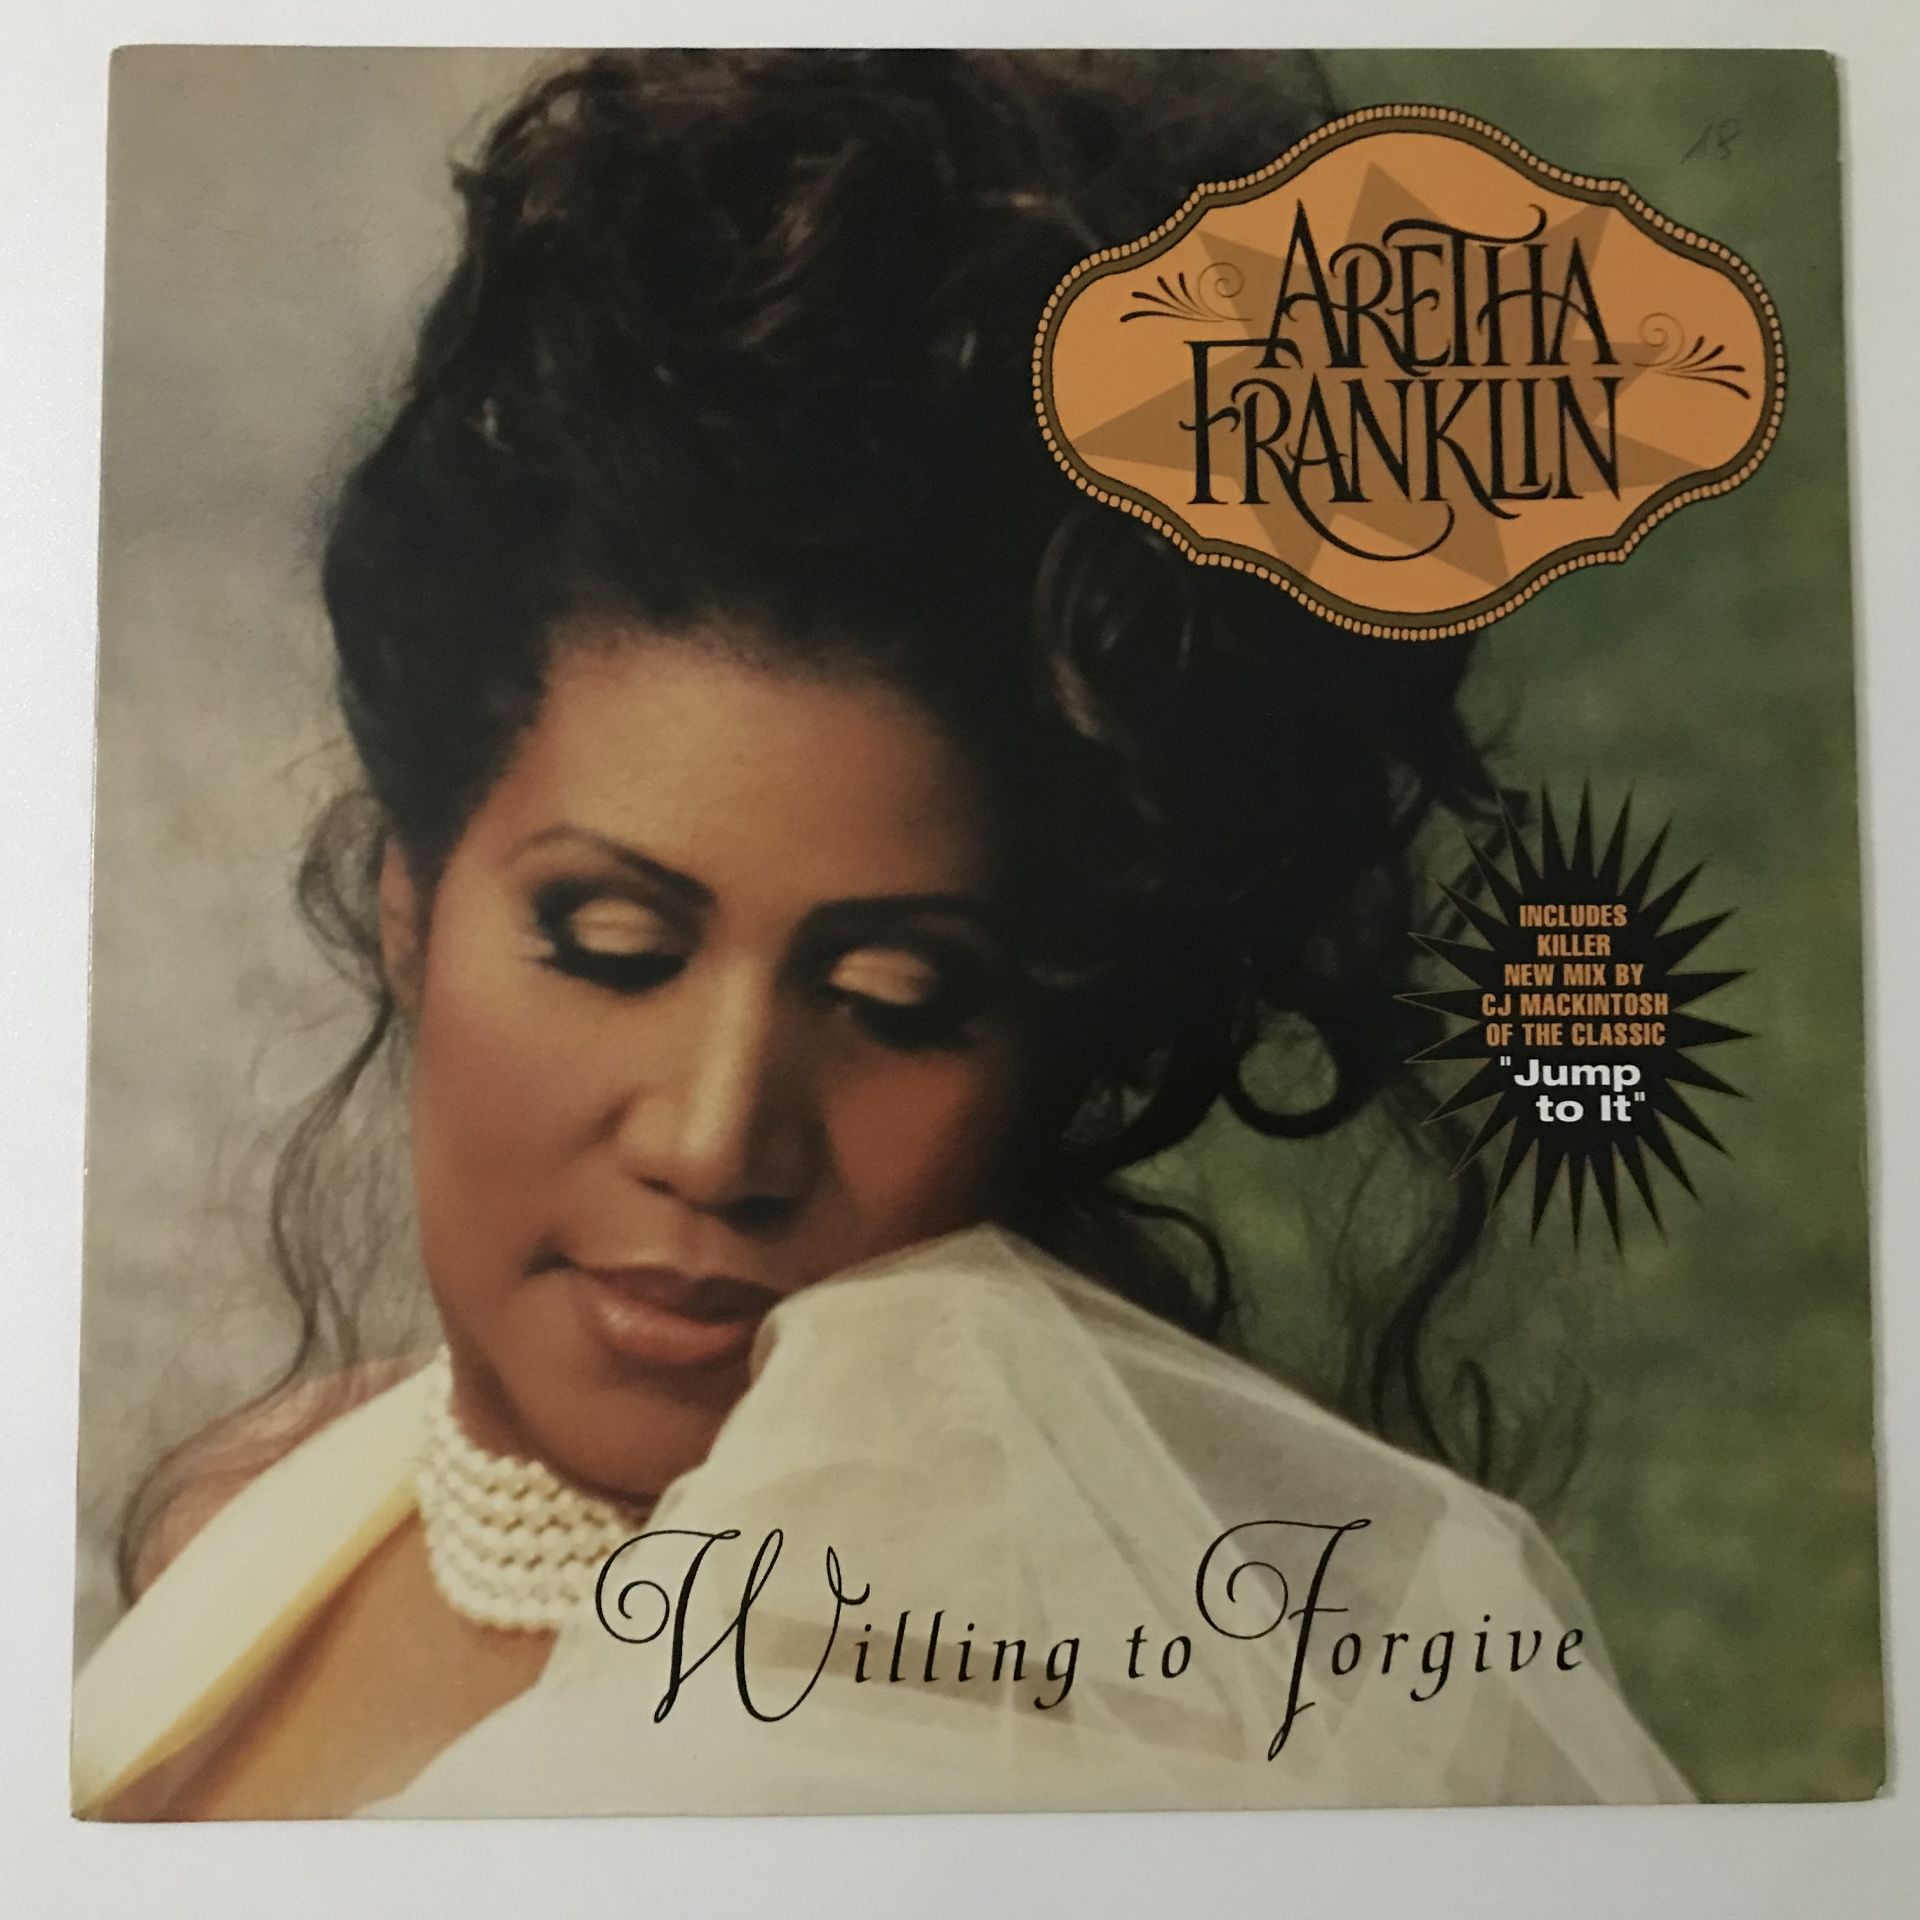 Aretha Franklin – Jump To It / Willing To Forgive